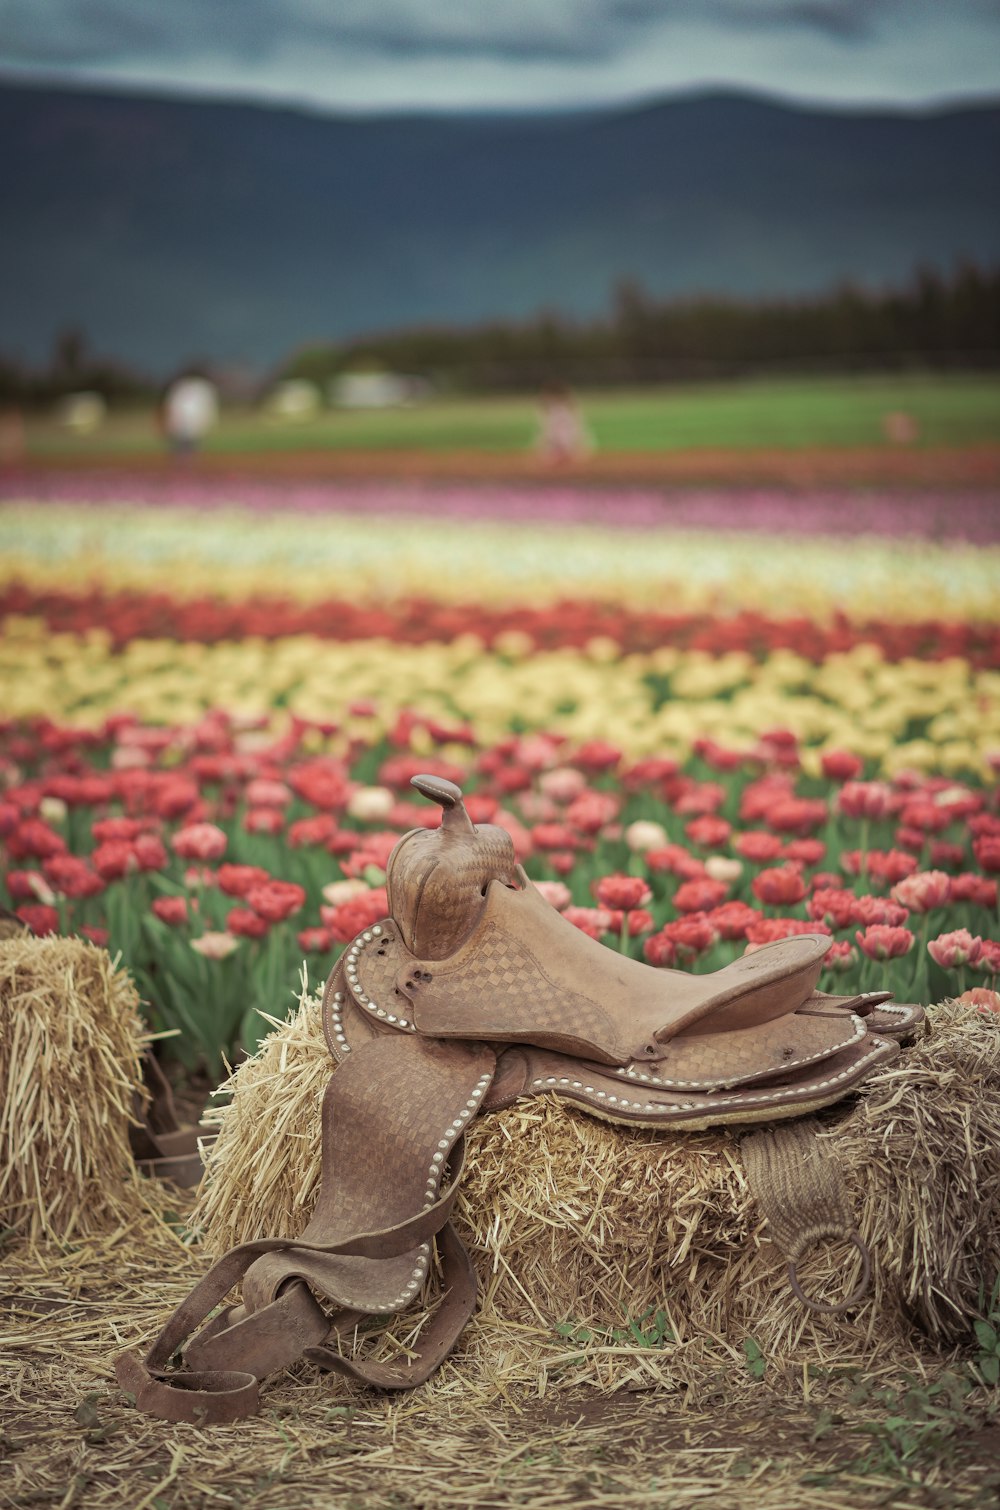 a saddle sits on a bale of hay in a field of flowers